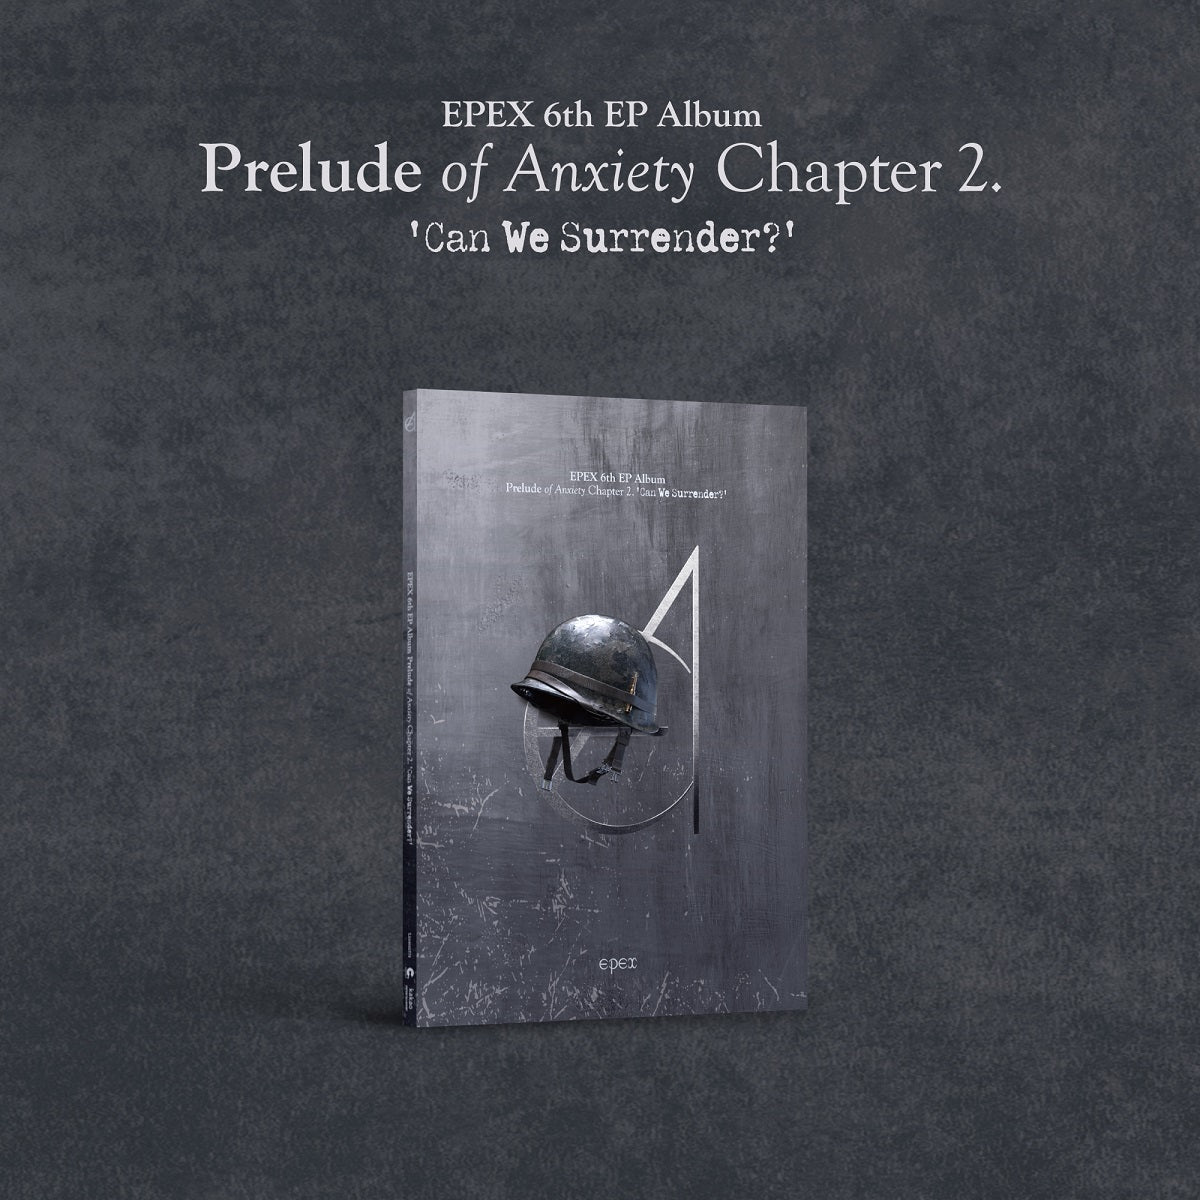 EPEX 6TH EP ALBUM 'PRELUDE OF ANXIETY CHAPTER 2. CAN WE SURRENDER?' GOLD SHOT VERSION COVER